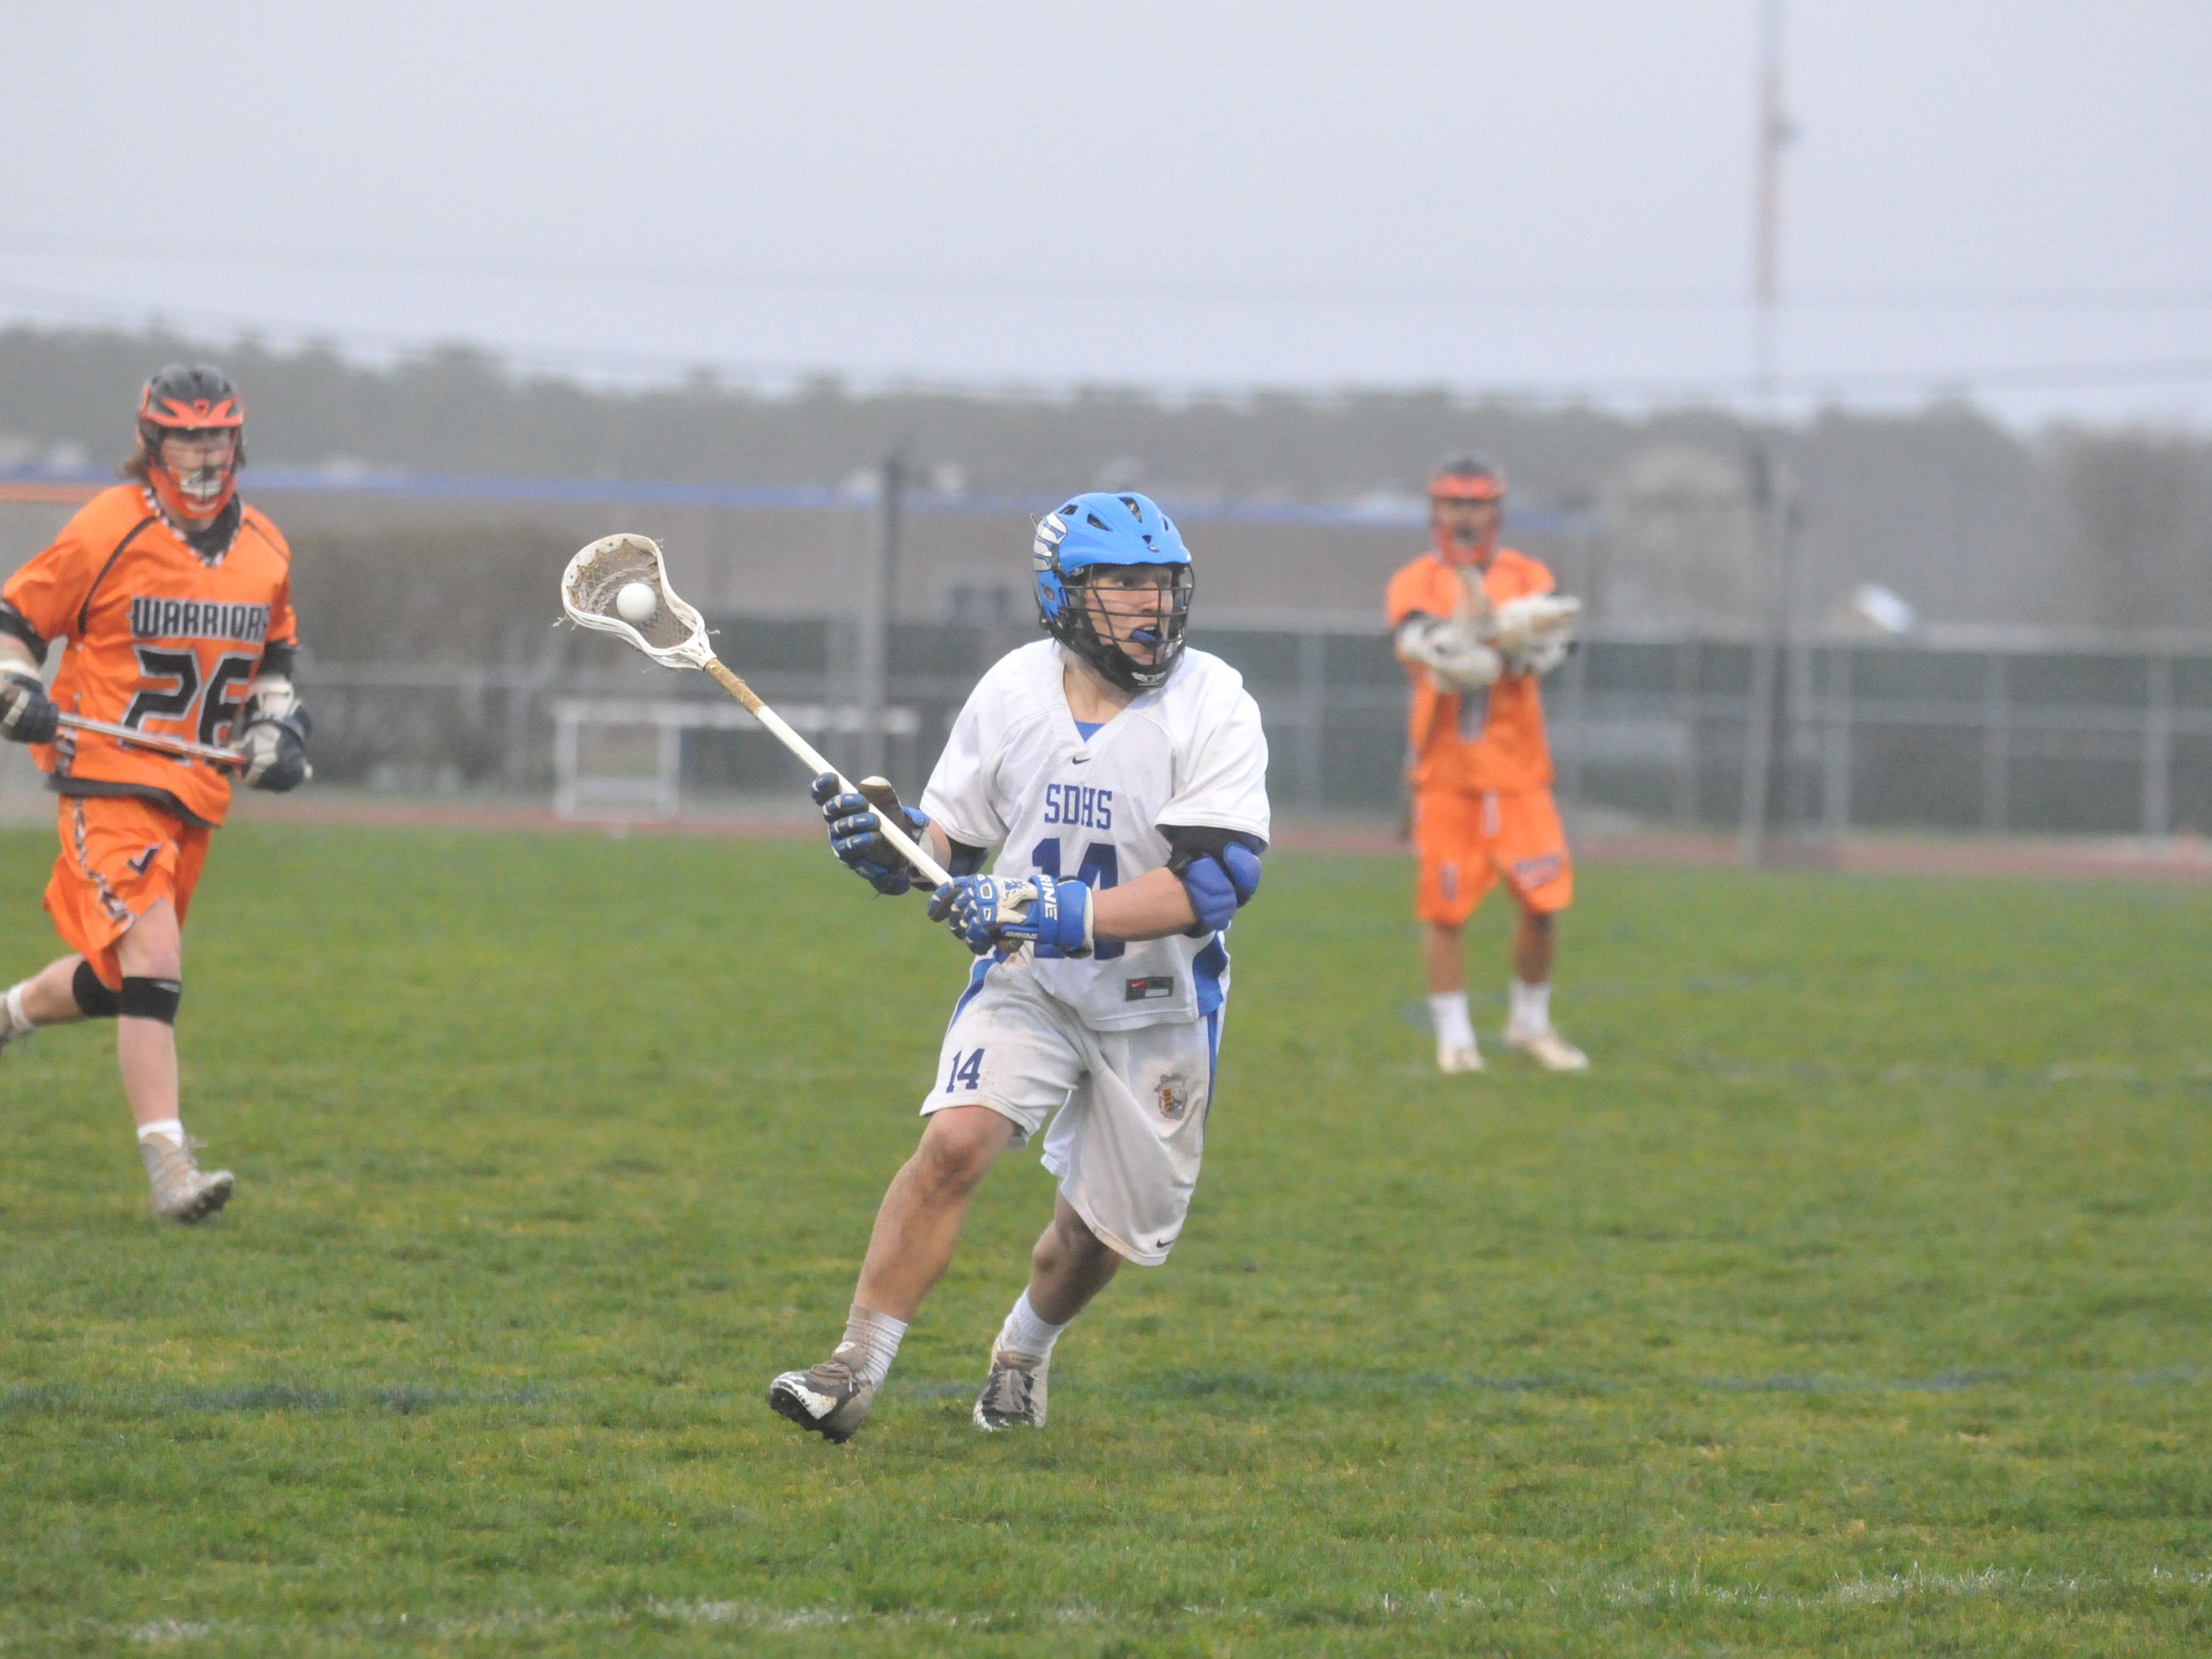 Stephen Decatur junior Dryden Brous looks for a pass during a game against Easton. The faceoff man has helped Decatur become a Bayside contender with the return of other players.